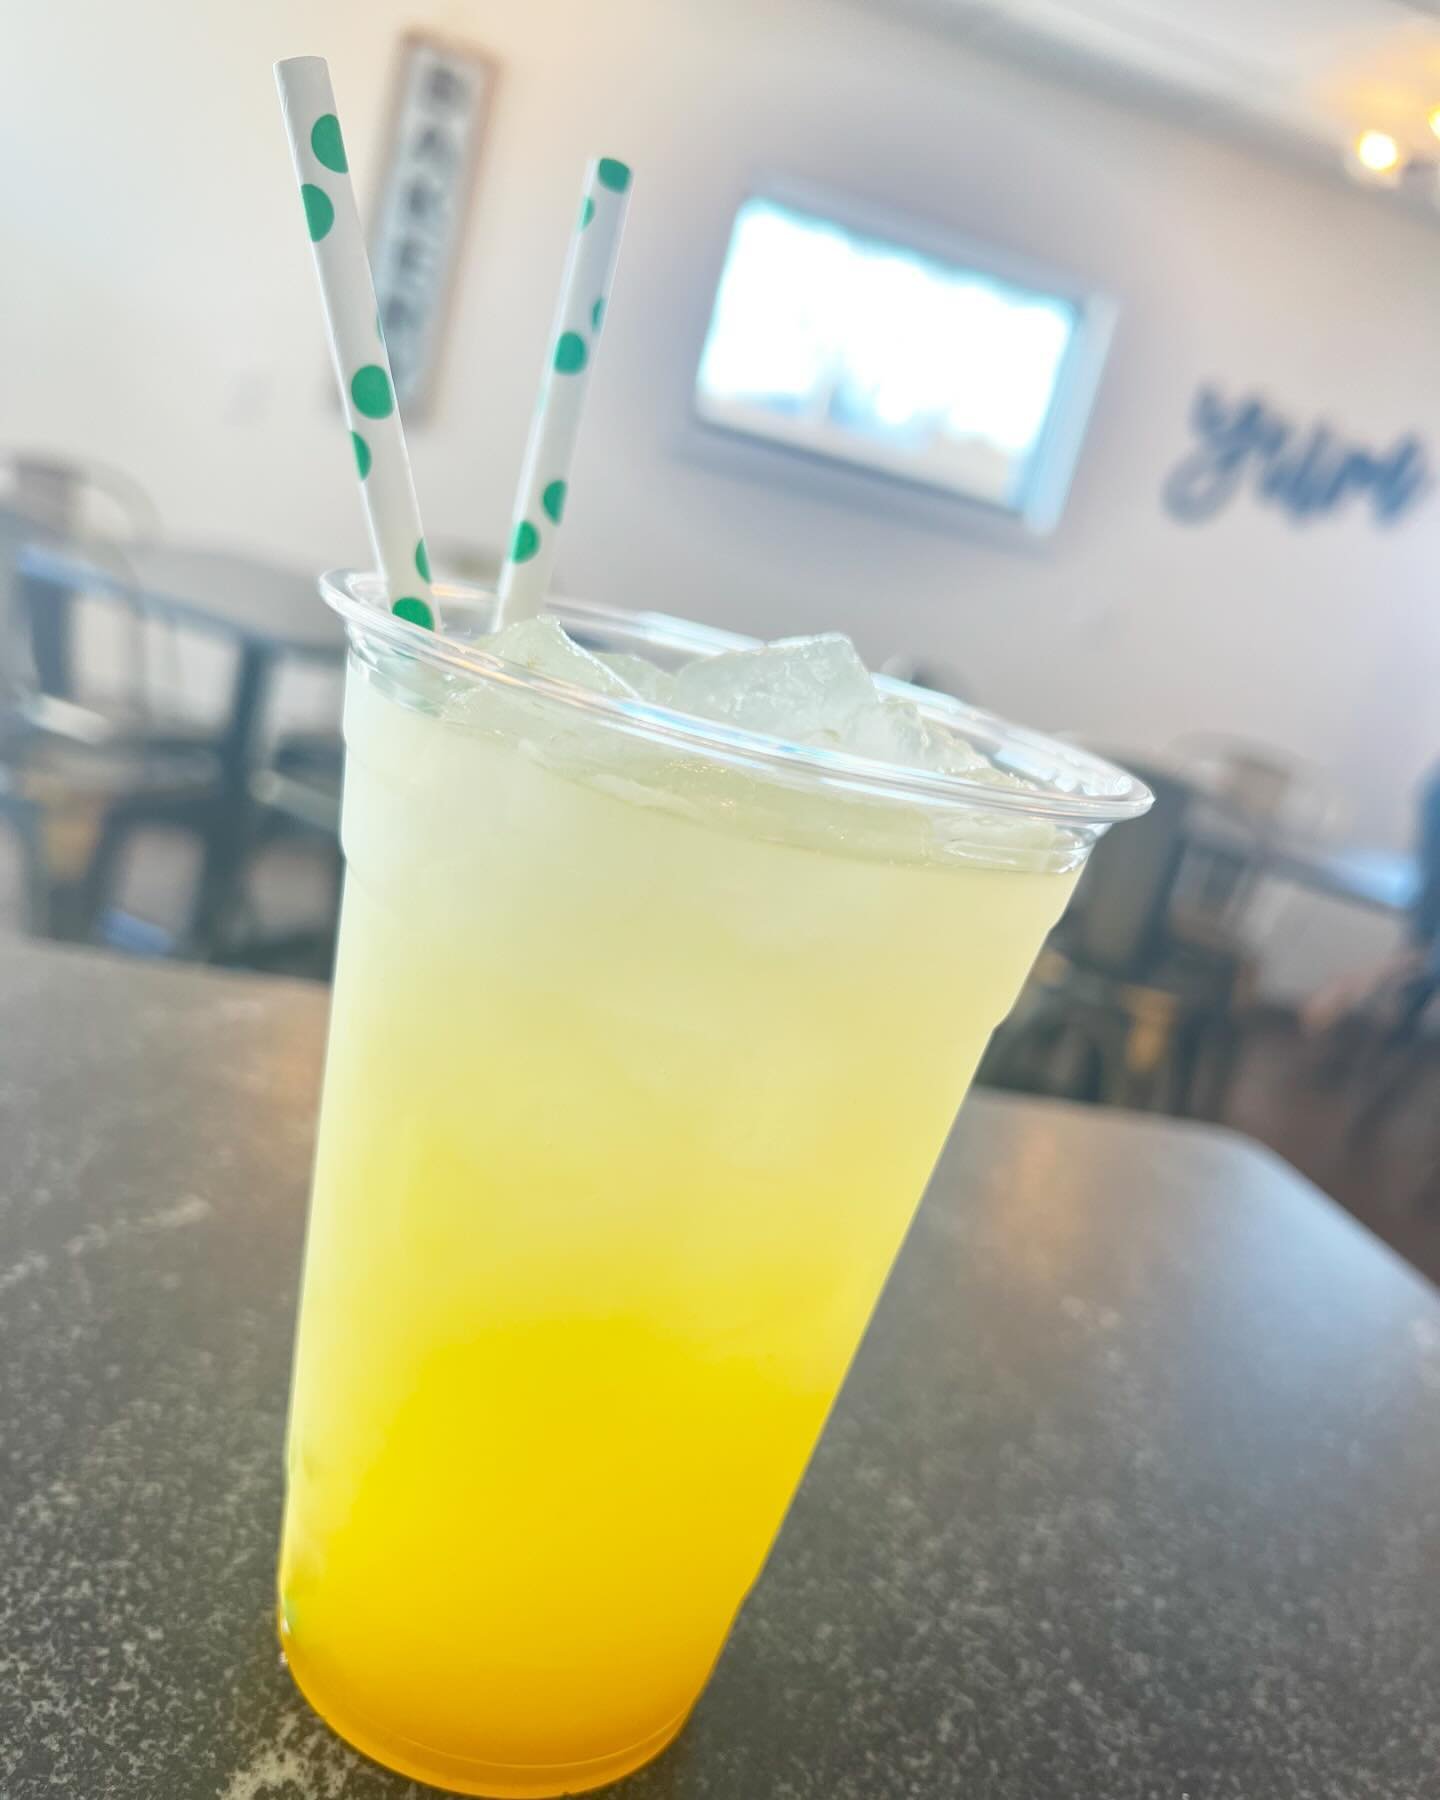 Have you tried our Pineapple Passion Lemonade yet?? It&rsquo;s sweet, it&rsquo;s tart and ohhhh so good🍋🍍🍋🍍🍋

#lushcakesmn #mnbakery #mncakery #cakeshop #coffeeshop #housemadelemonade #summertime #eatlocal #drinklocal